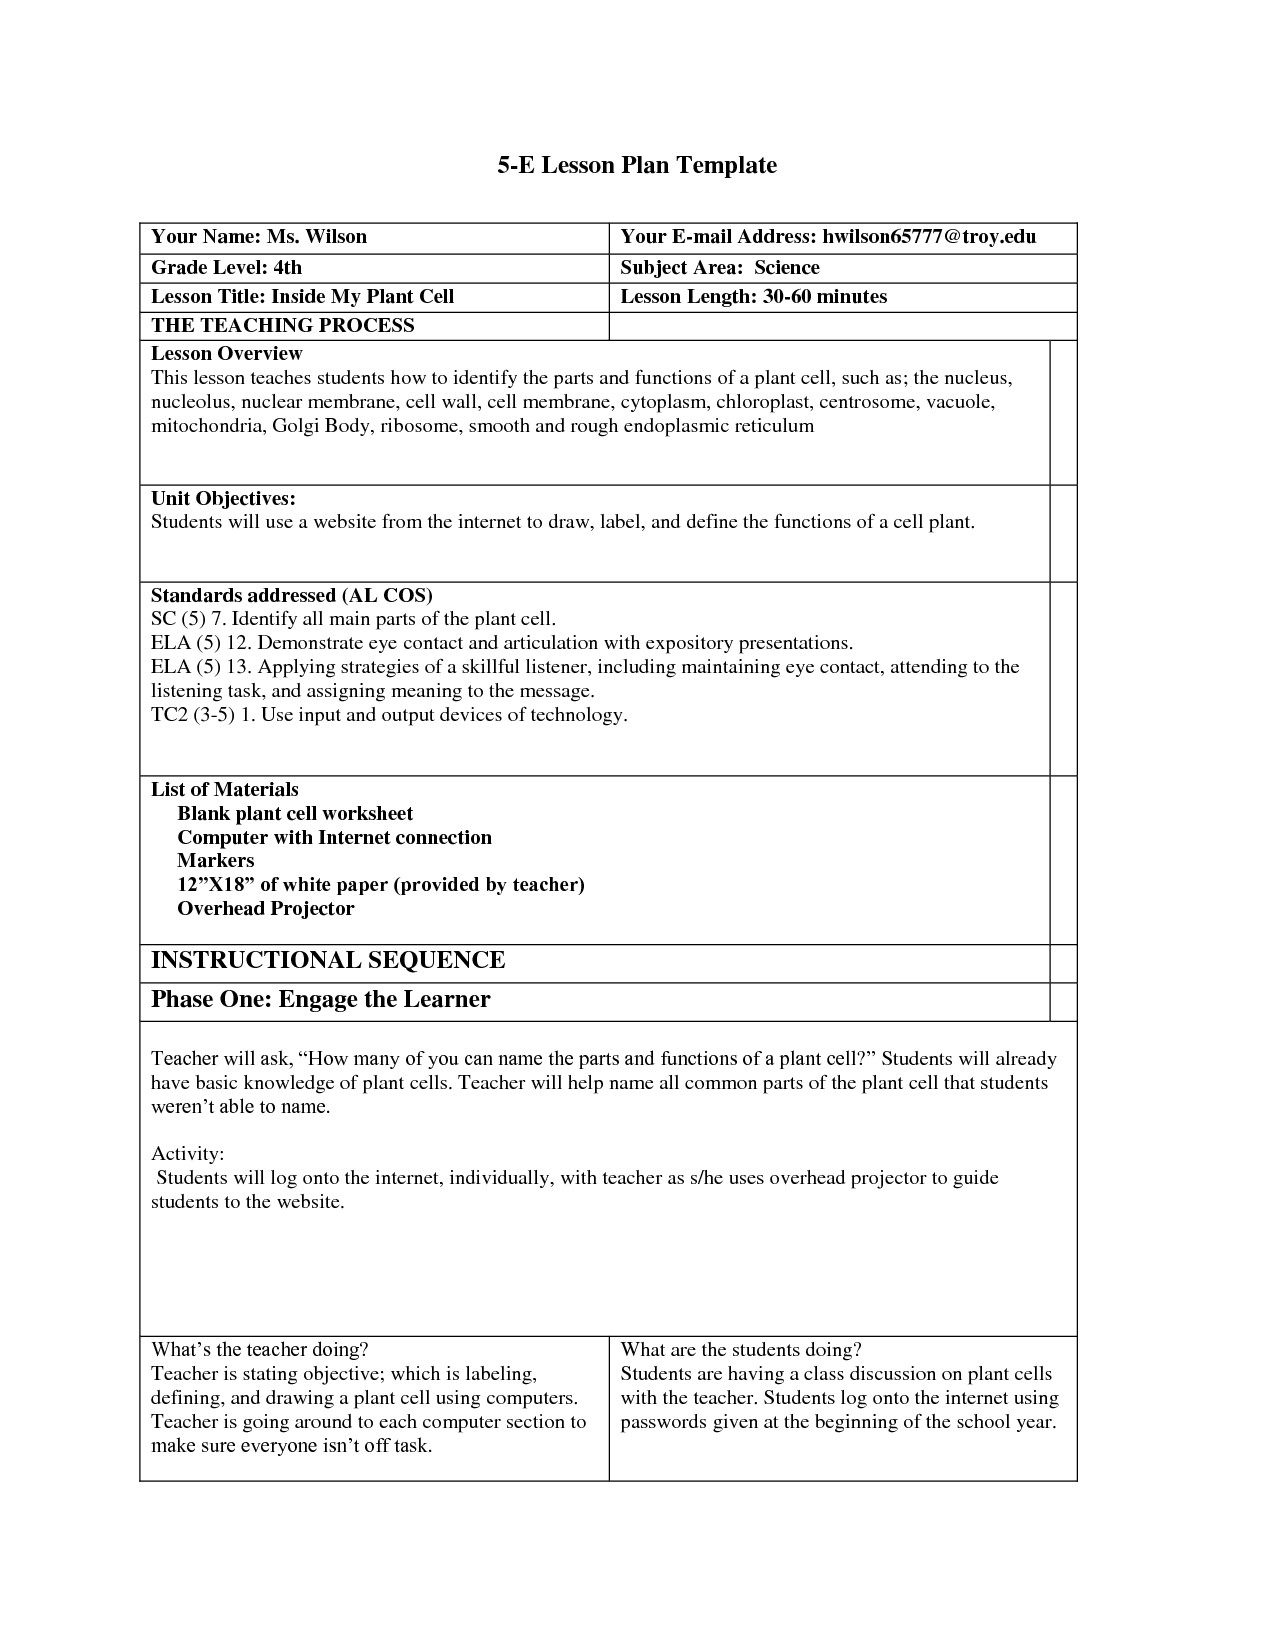 Lesson Plans that Work Scope Of Work Template